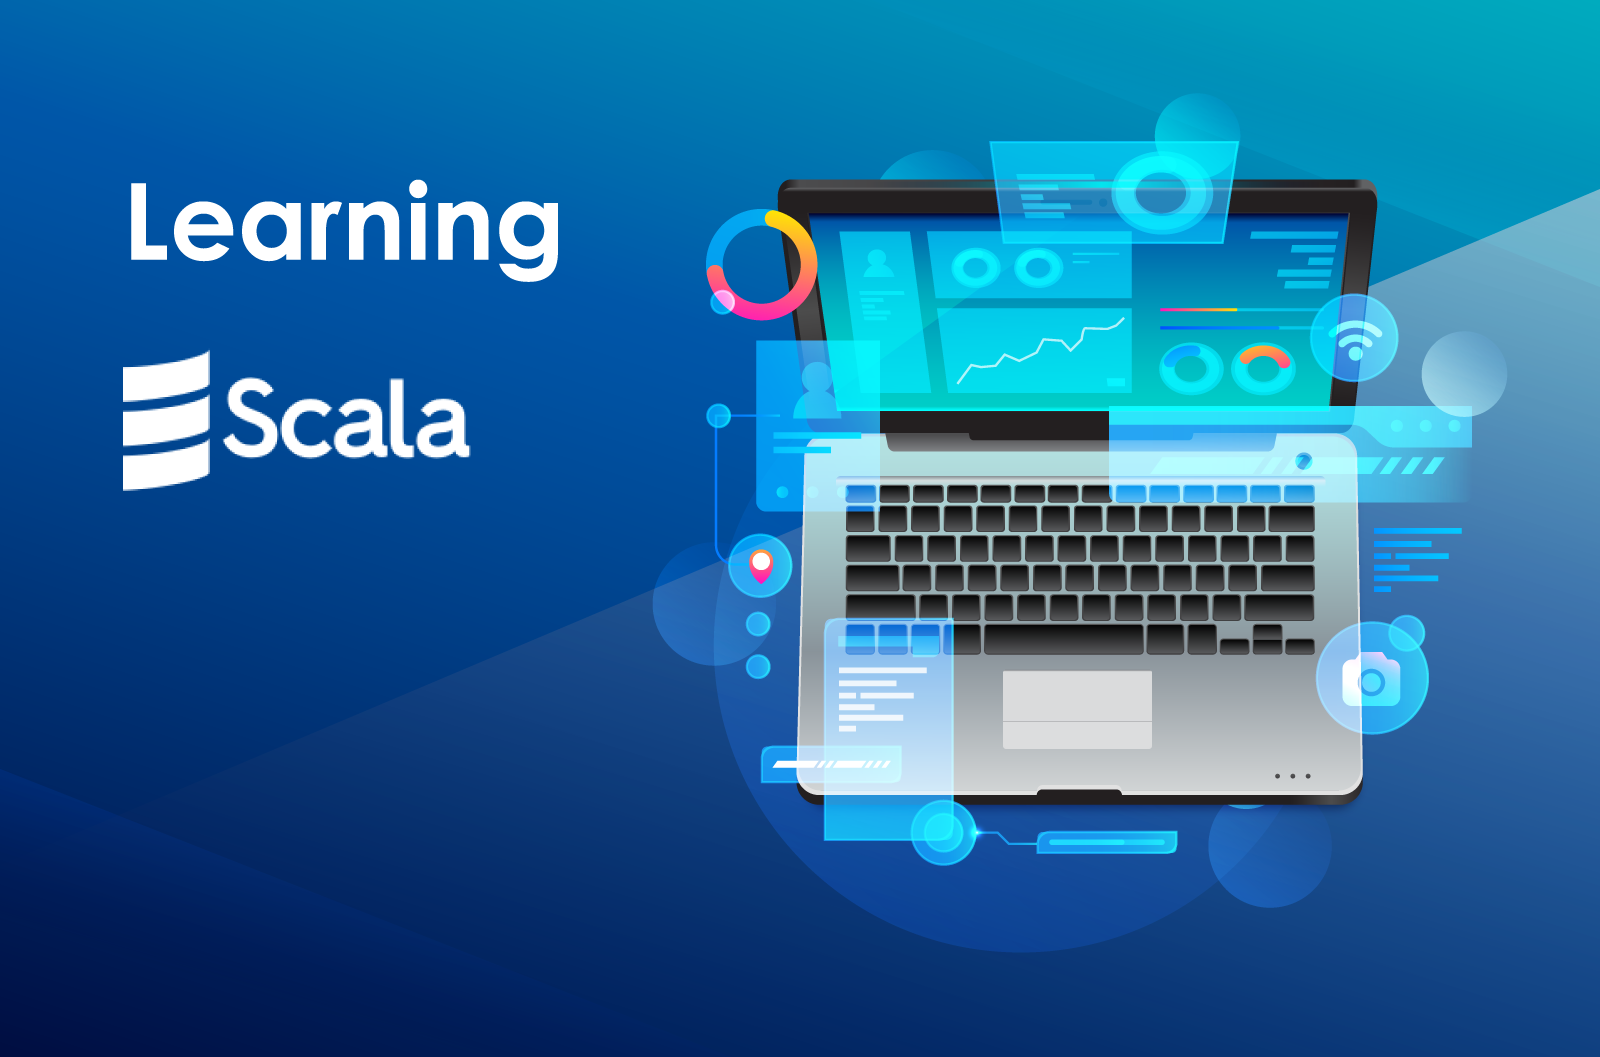 Learning Scala by Example, chapter 4